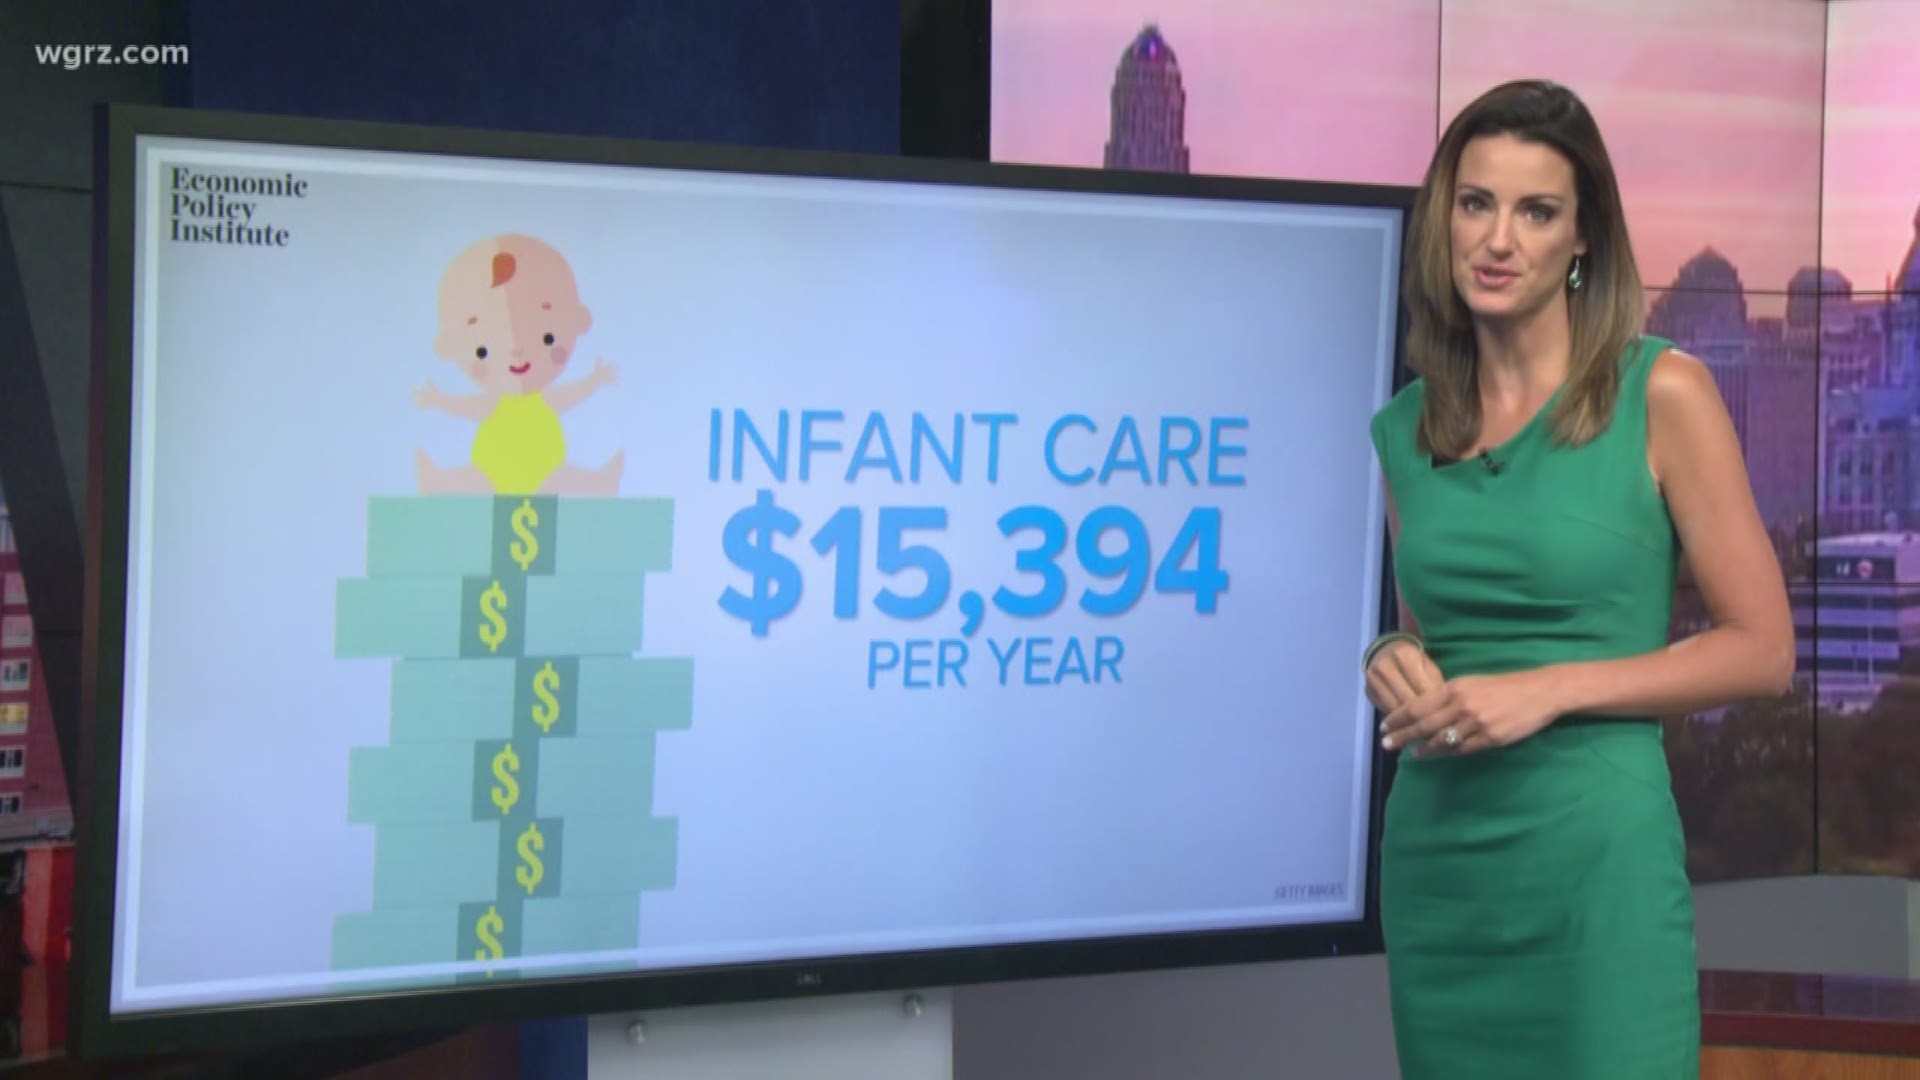 The Economic Policy Institute discovered care for an infant costs, on average, more than $15,000 per year.